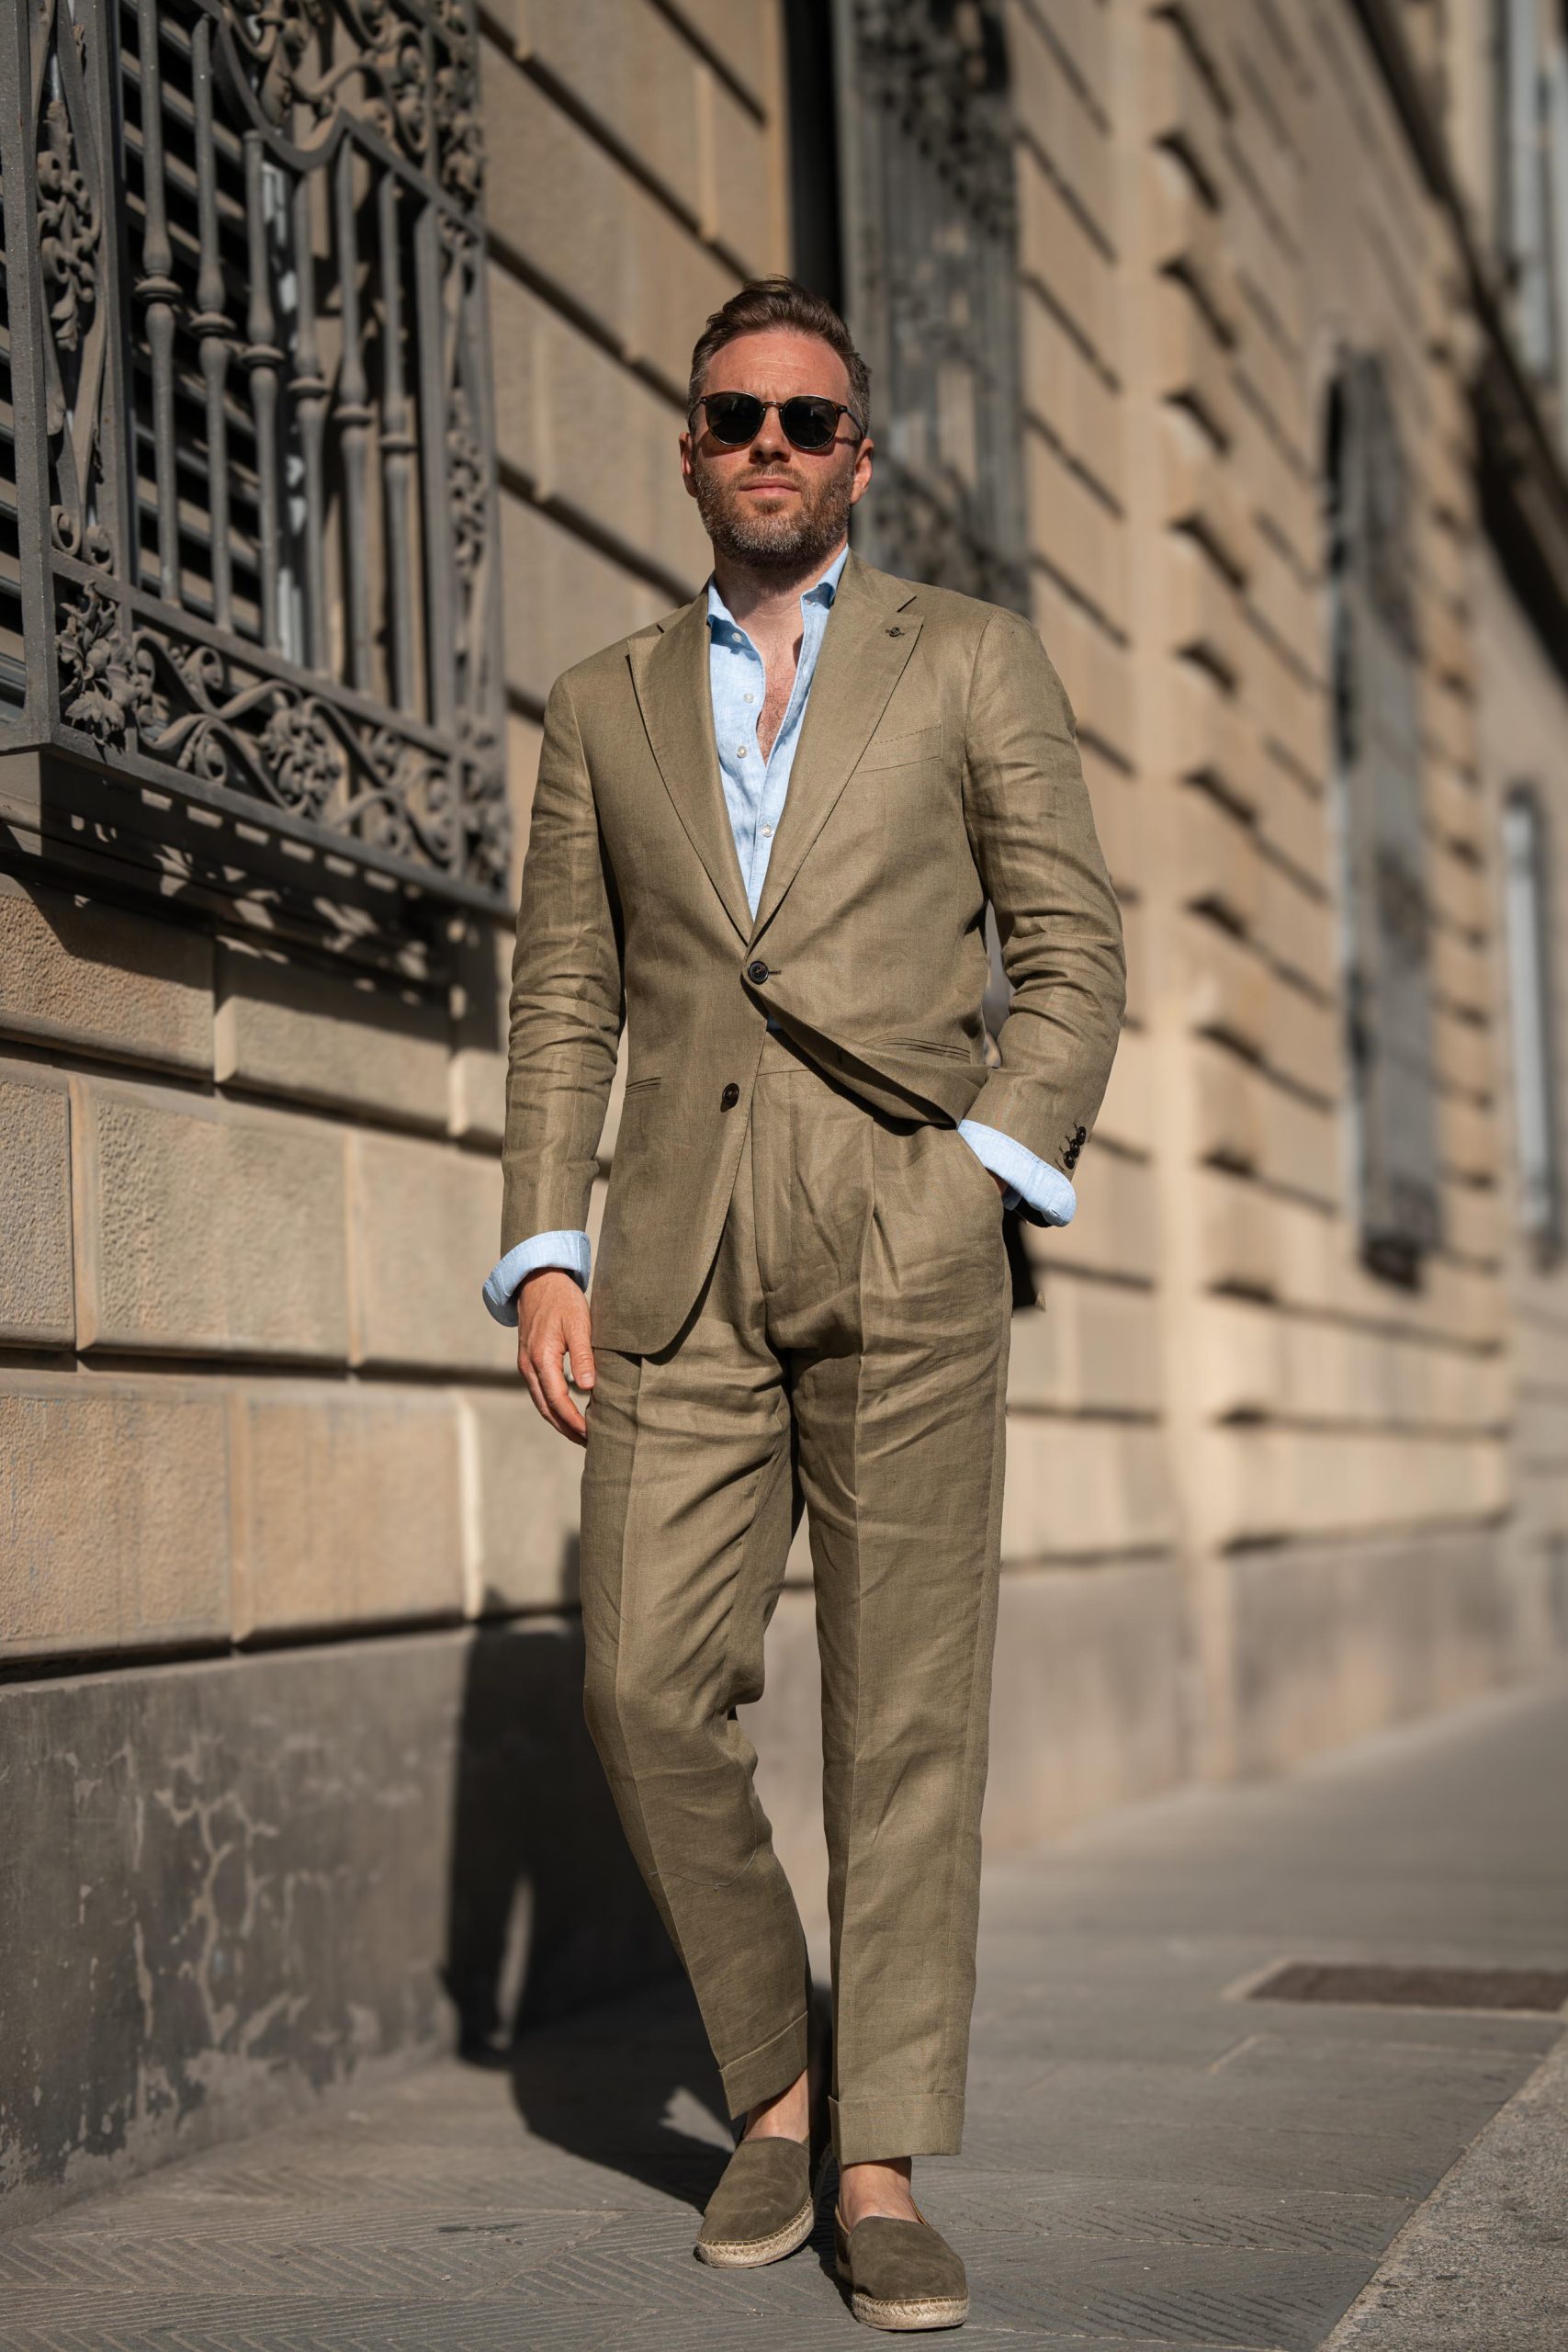 khaki suits trend at pitti uomo, made by mond